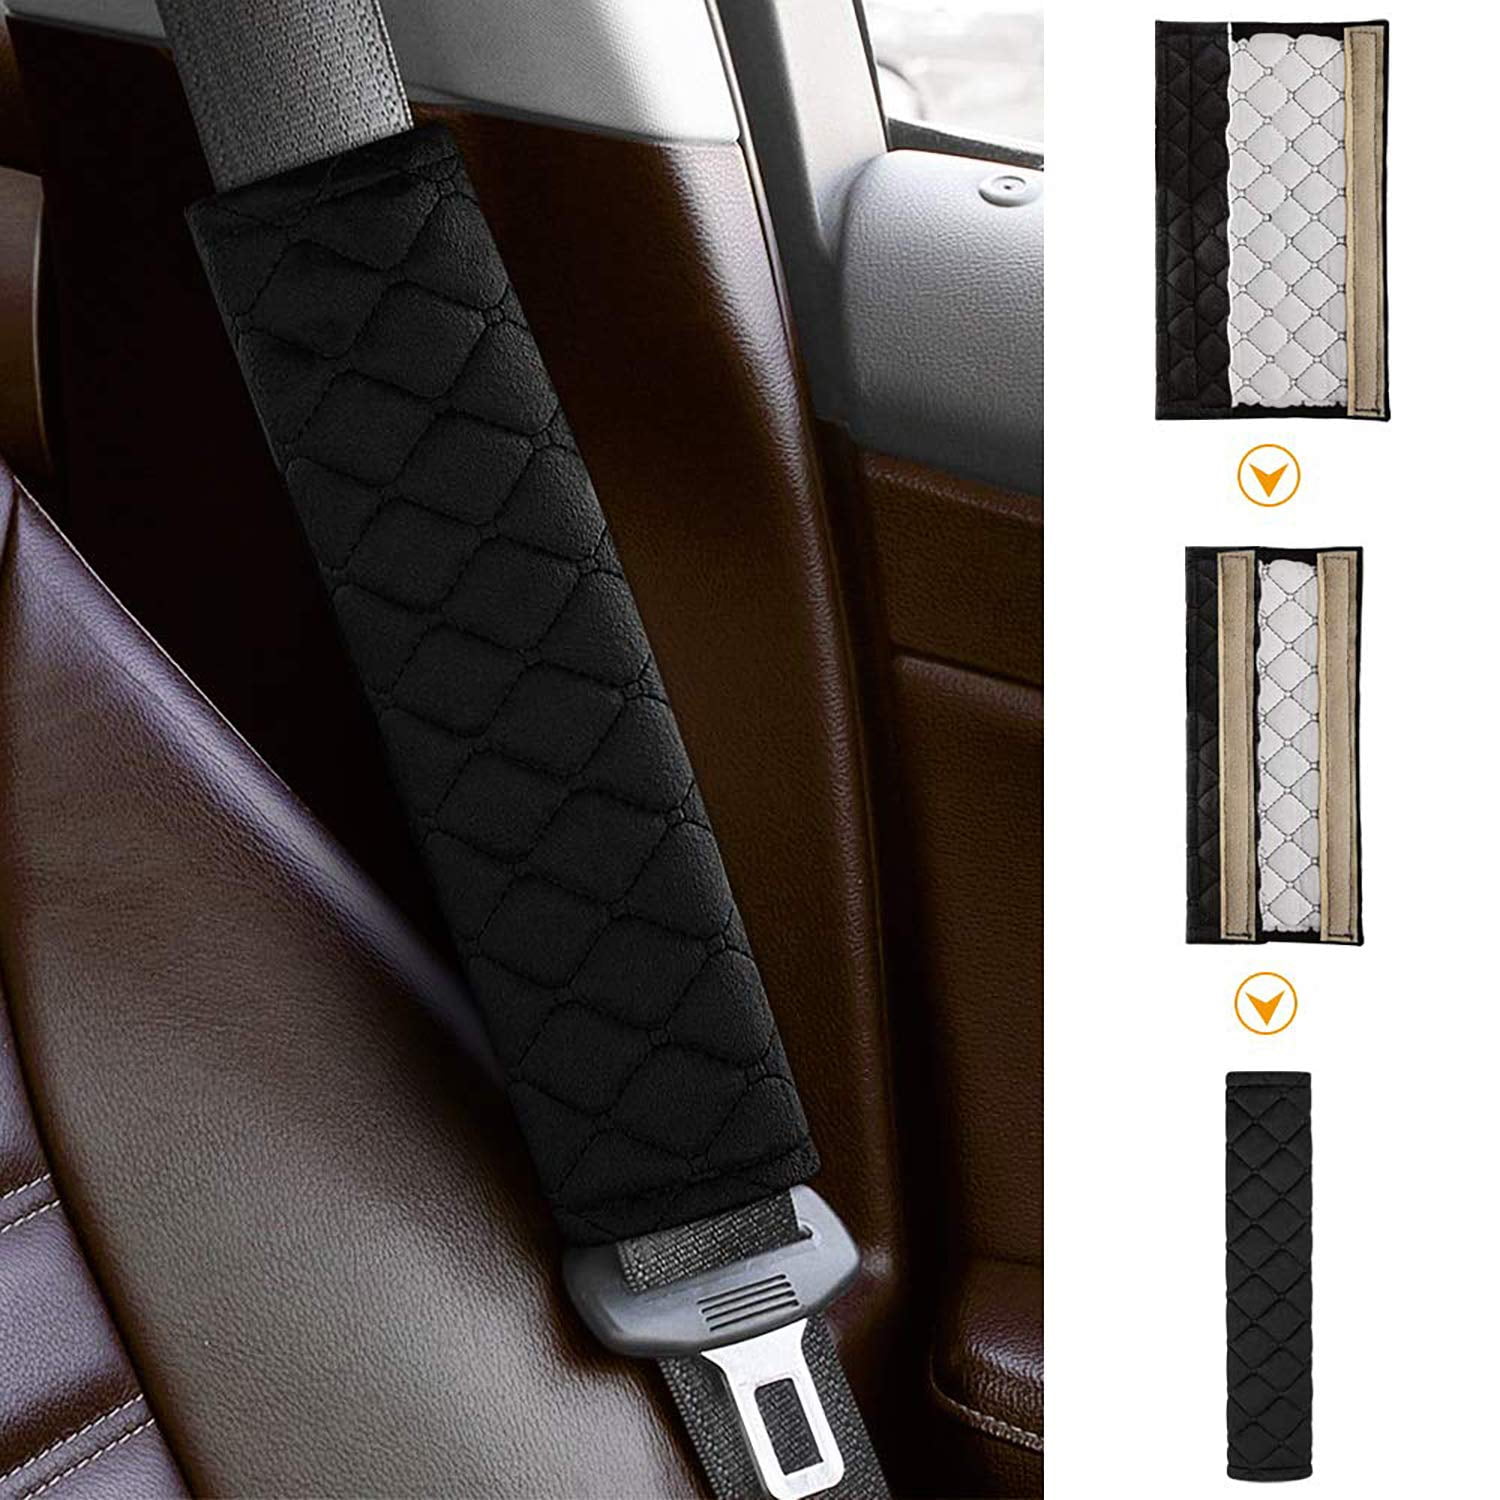 Universal Car Seat Belt Pads Seat Shoulder Strap Pad Cushion Cover Car Belt Protector Safety Belt Cover for Adults Kids 2pcs Gray